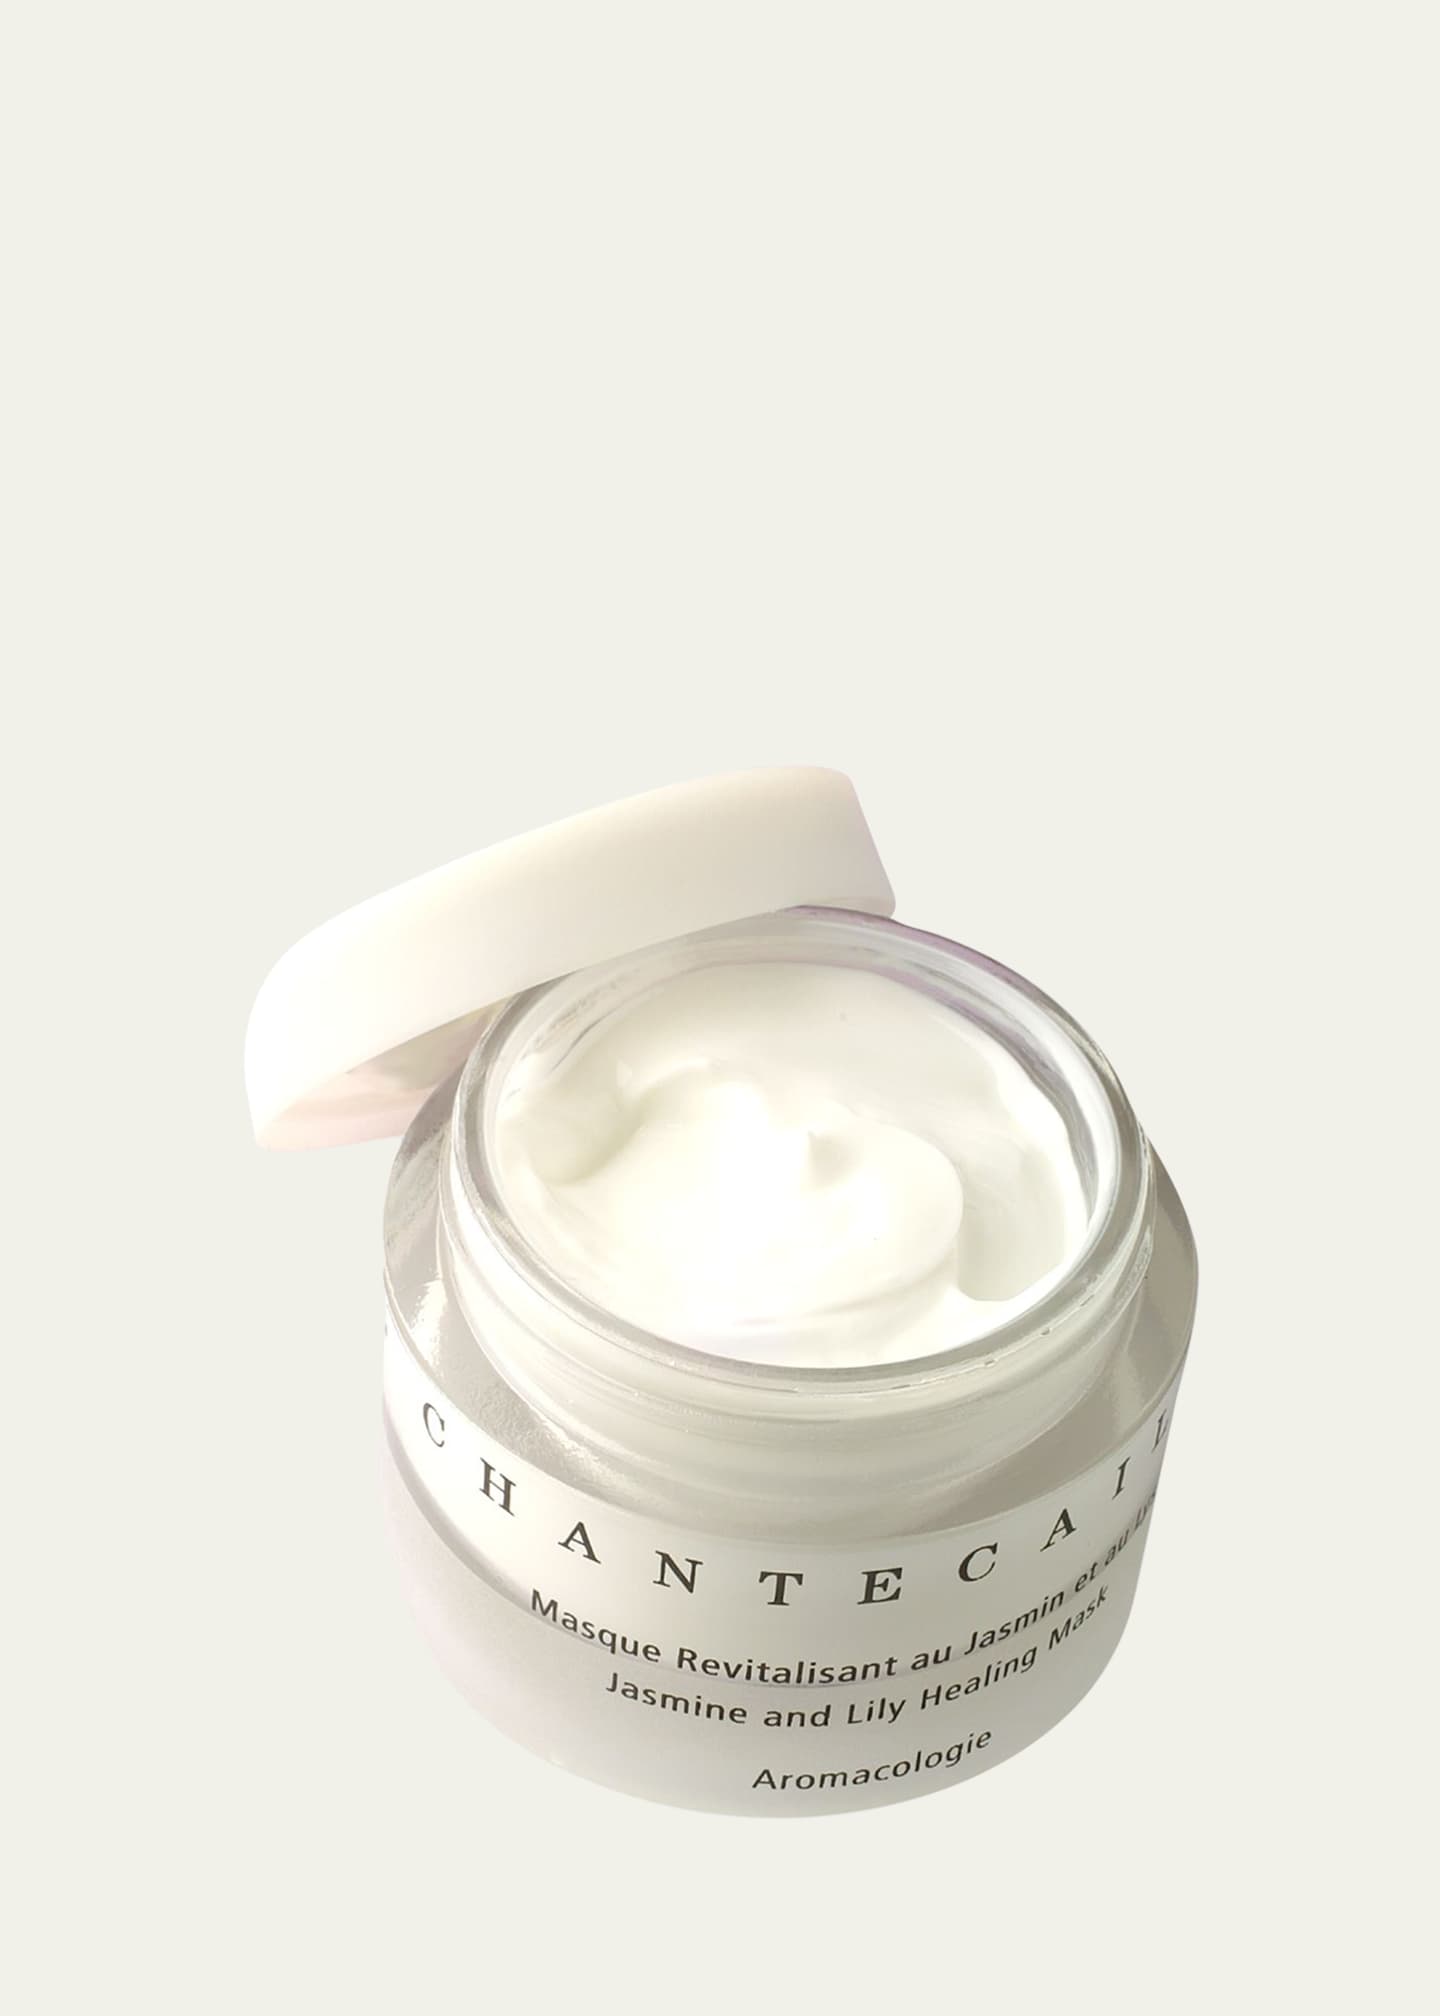 Chantecaille Jasmine and Lily Healing Mask, 1.7 oz.